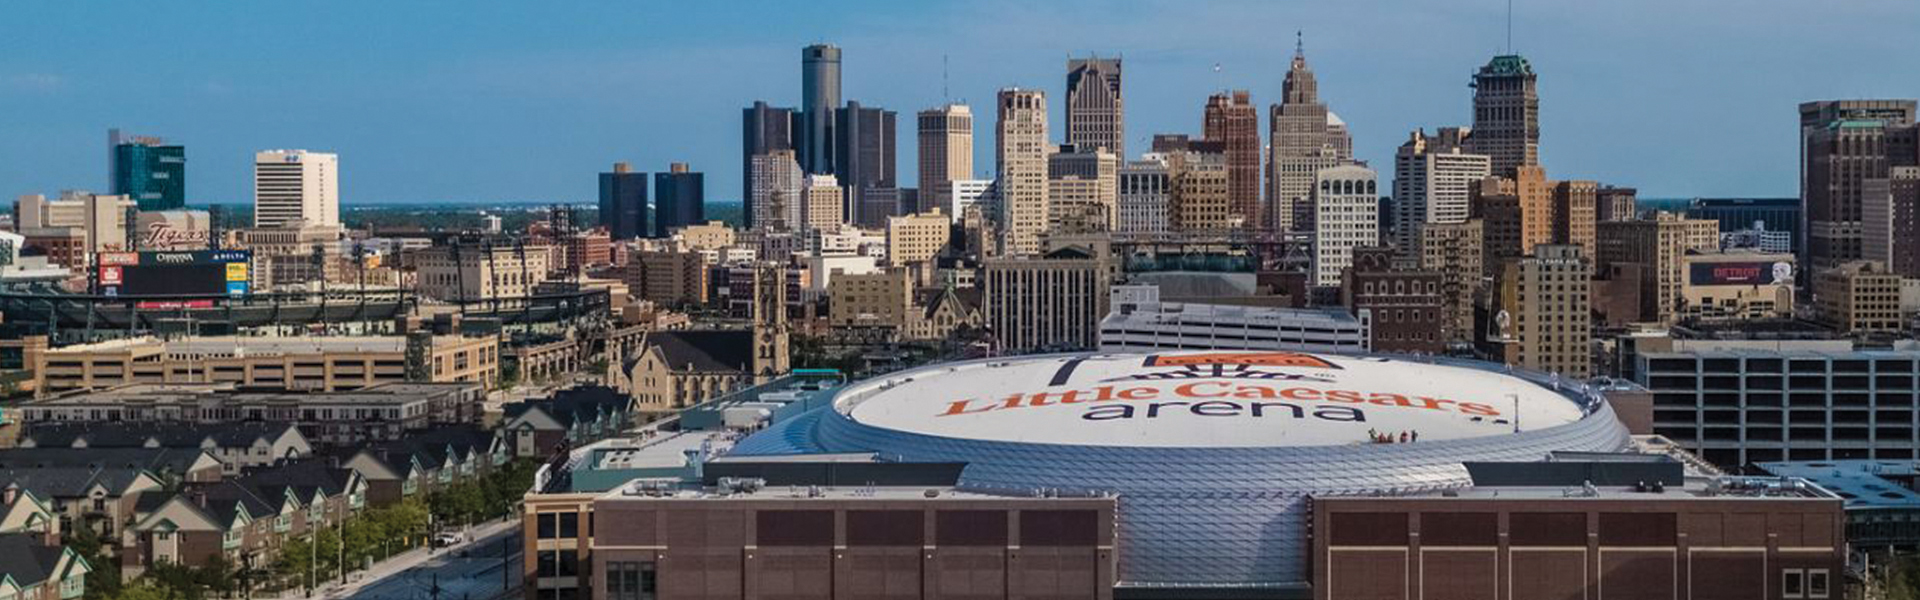 View of Little Caesars Arena and Detroit, Michigan skyline.